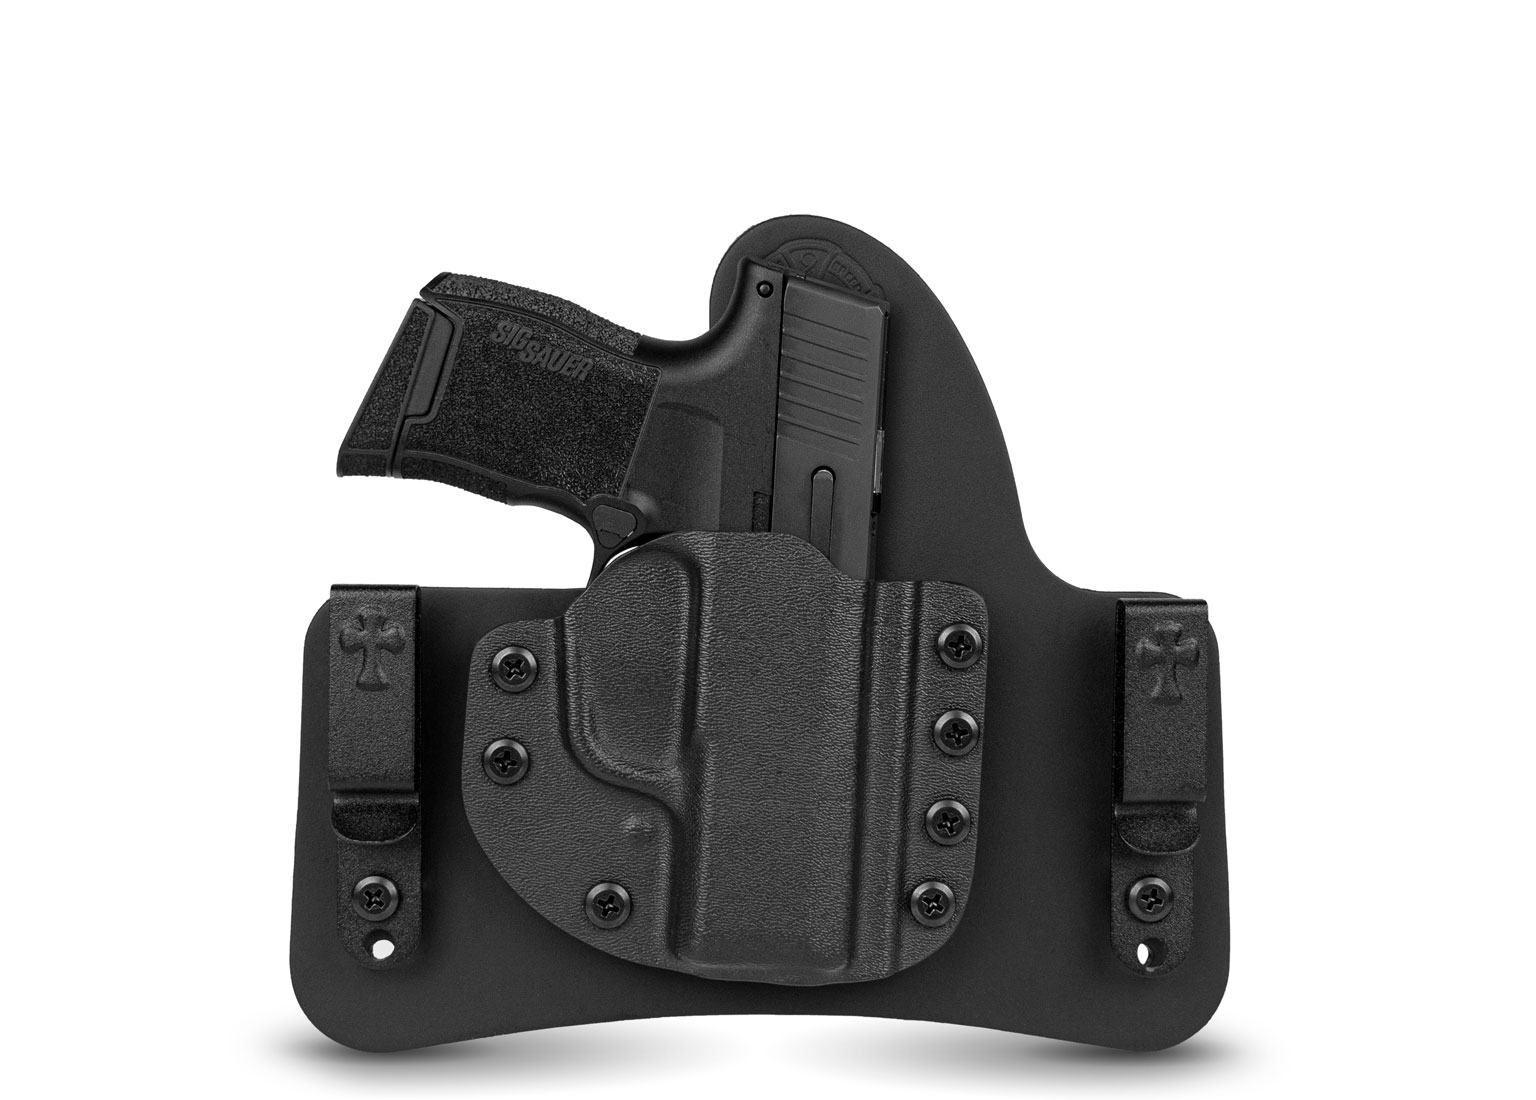 American Shield 2 Details about   NT Hybrid IWB Holster for Springfield Handguns 